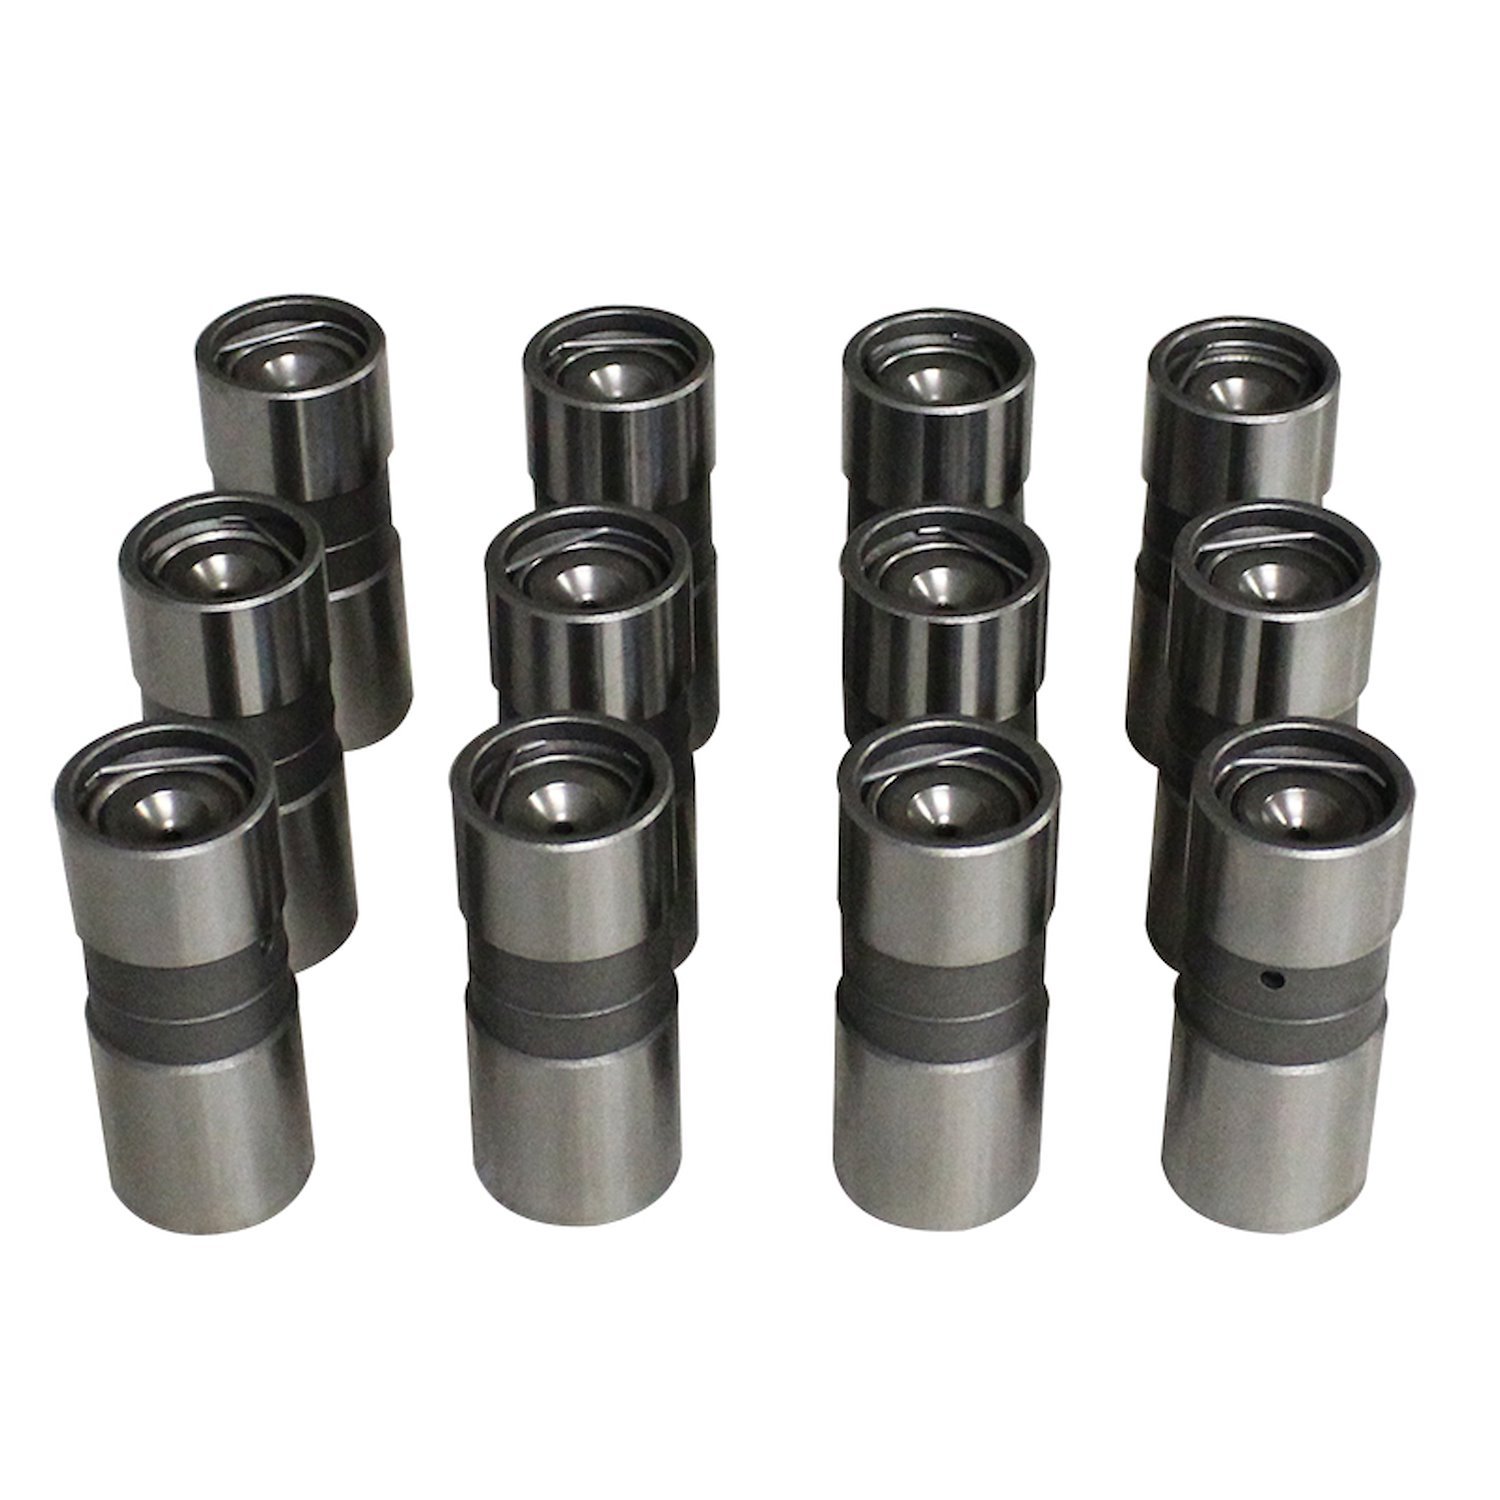 Performance Hydraulic Flat Tappet Lifter Set Buick V6 Even Fire 181-252